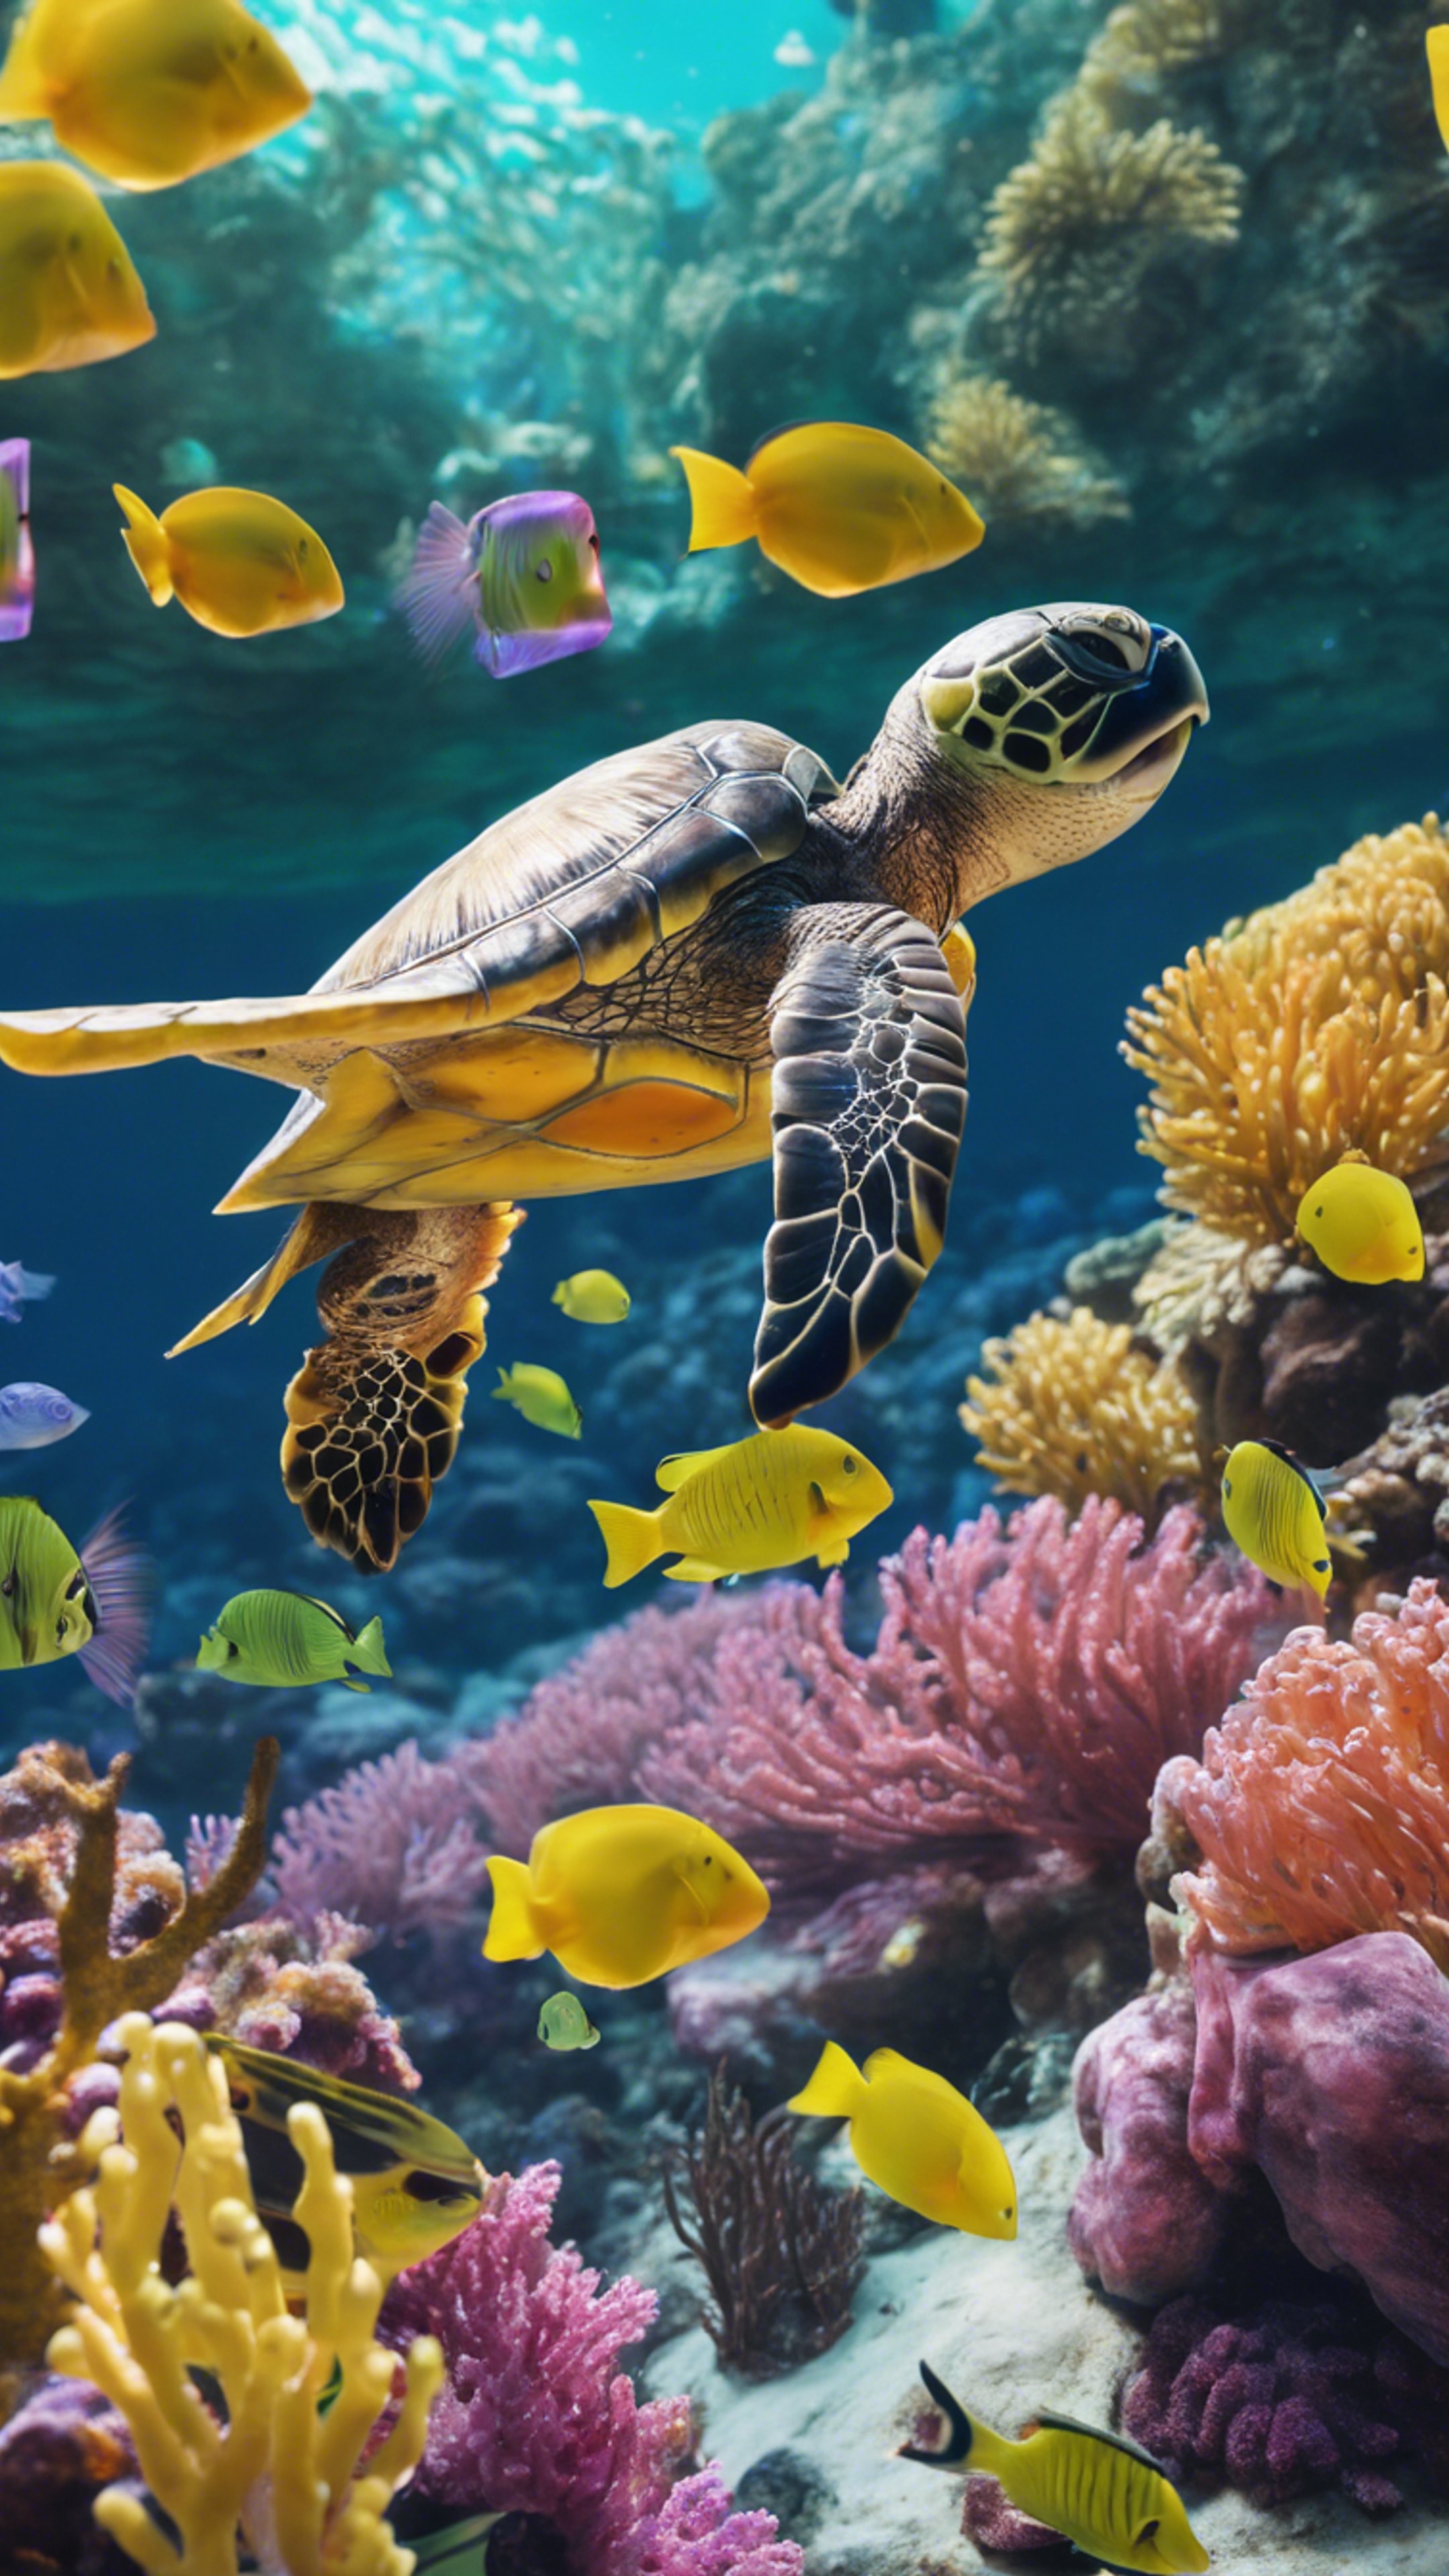 A sea turtle curiously interacting with colorful fishes in a reef. Hintergrund[2bbd294c31244e90b849]